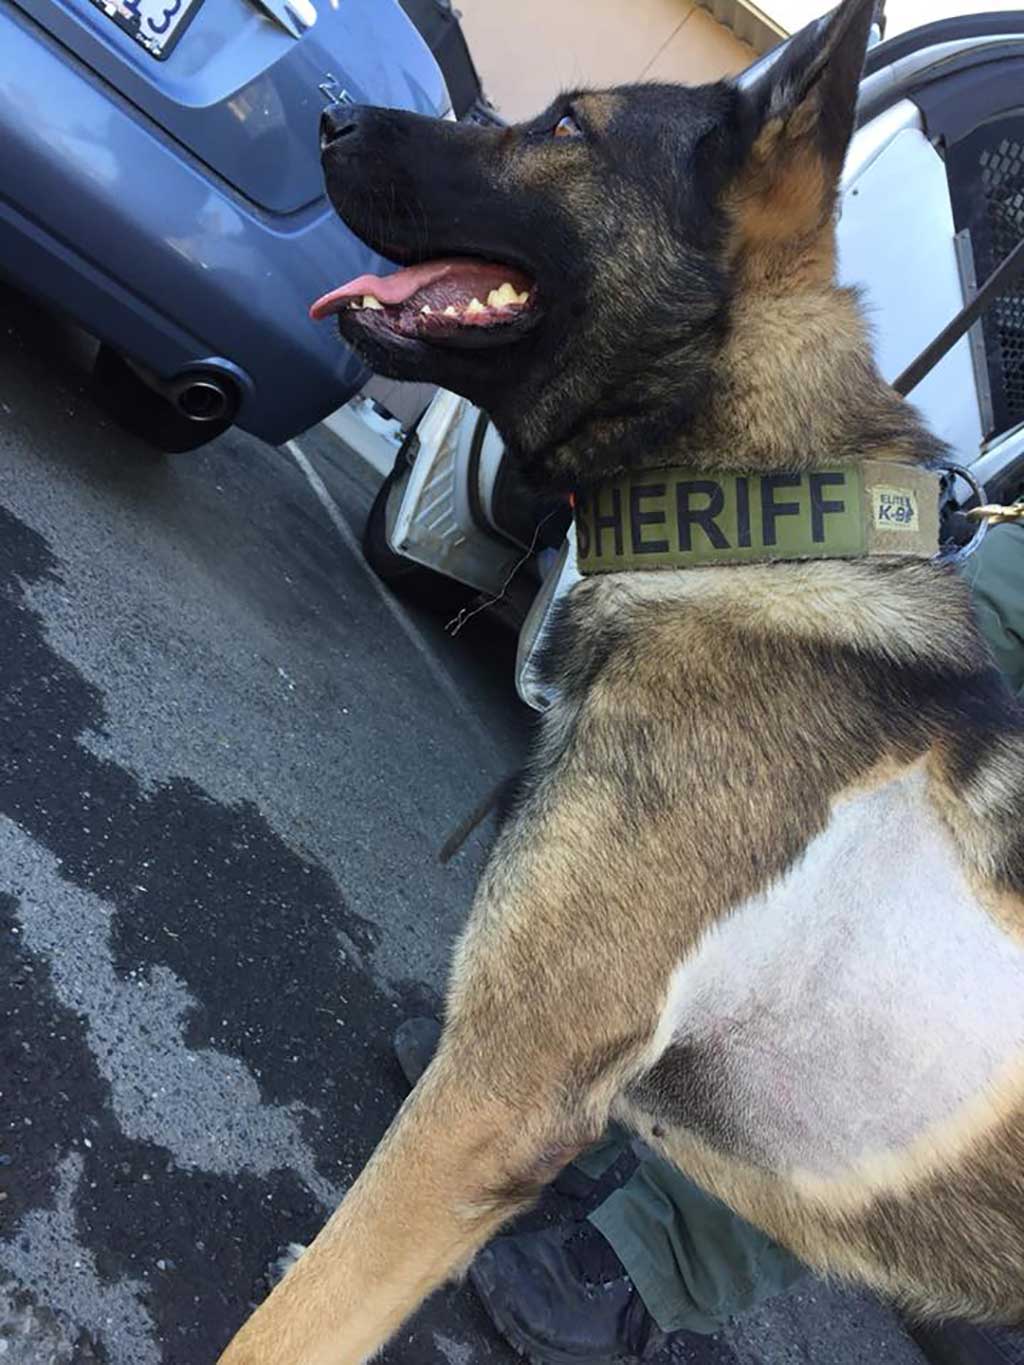  A police dog is another agent (at least in the US). 